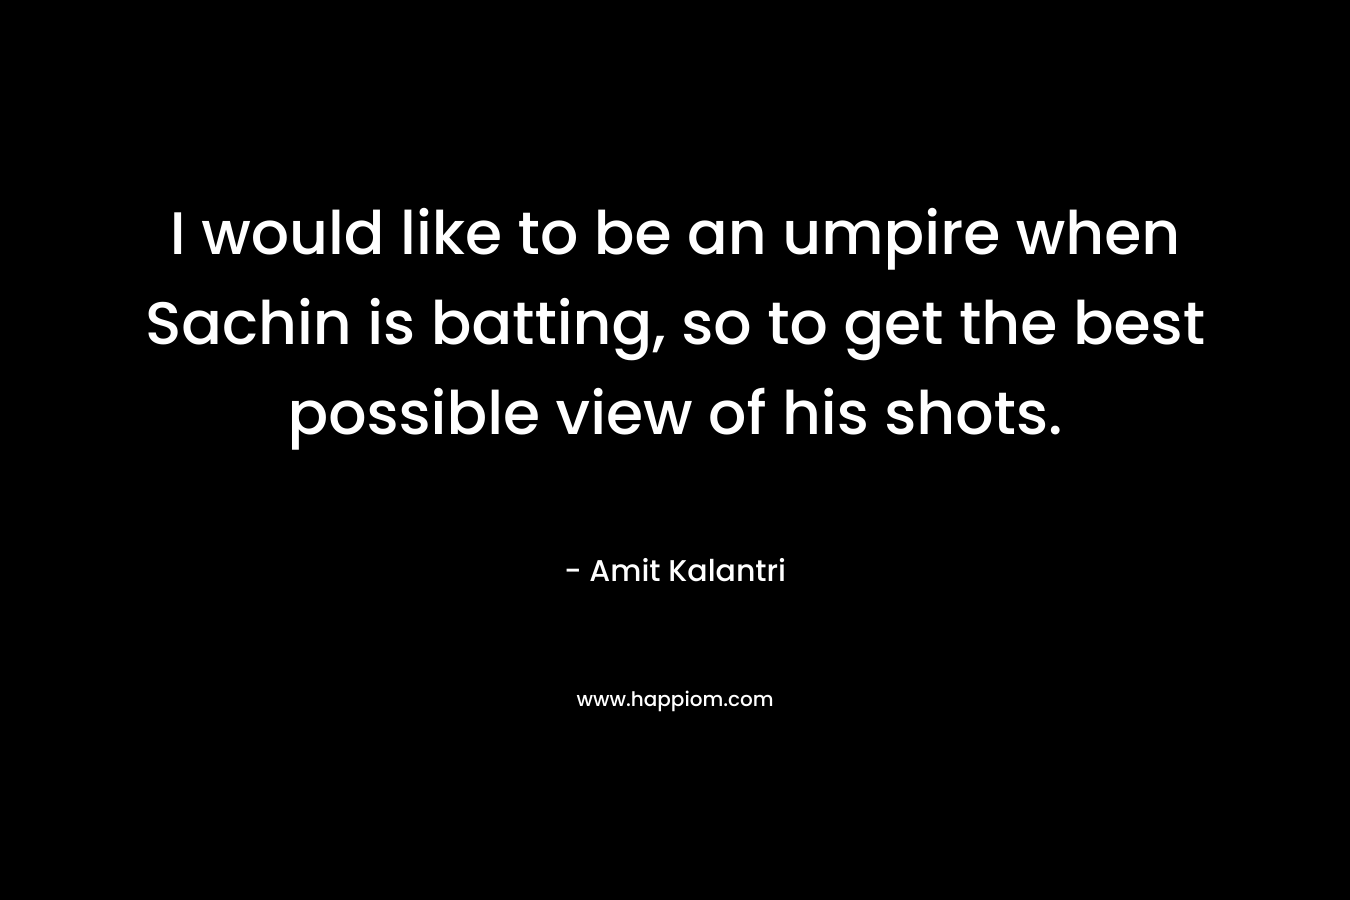 I would like to be an umpire when Sachin is batting, so to get the best possible view of his shots. – Amit Kalantri